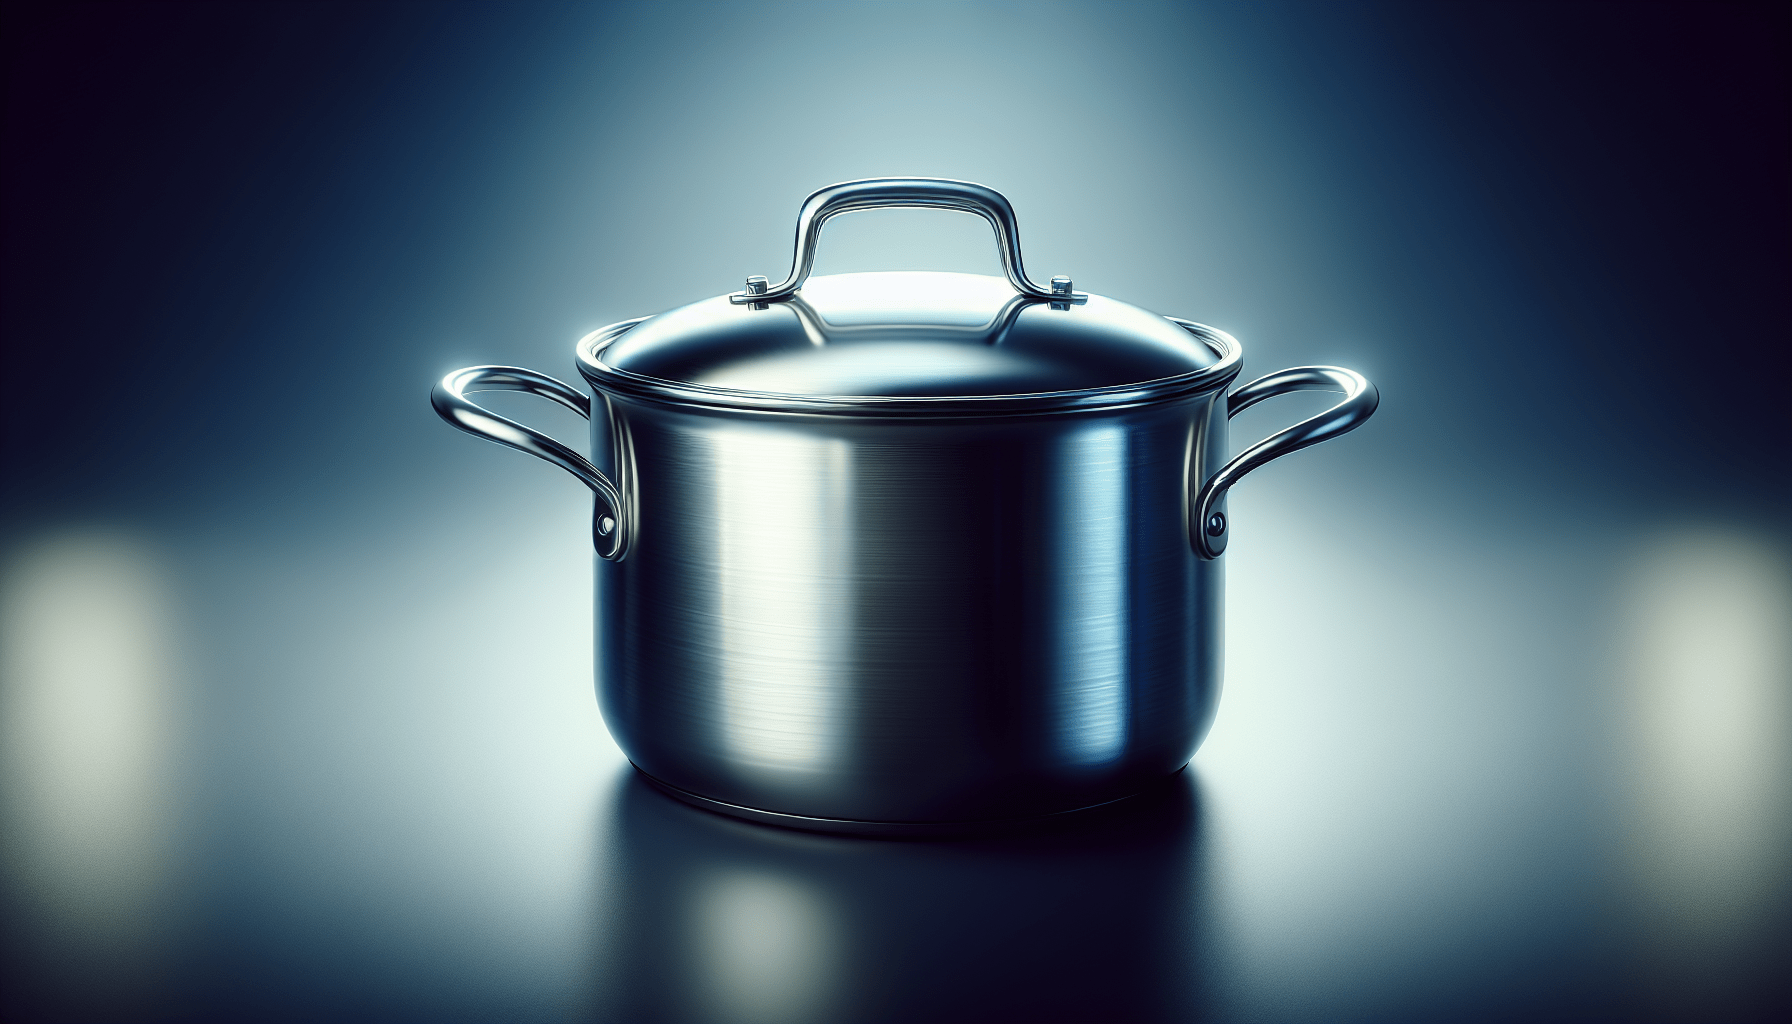 What Is The Most Hygienic Cookware?